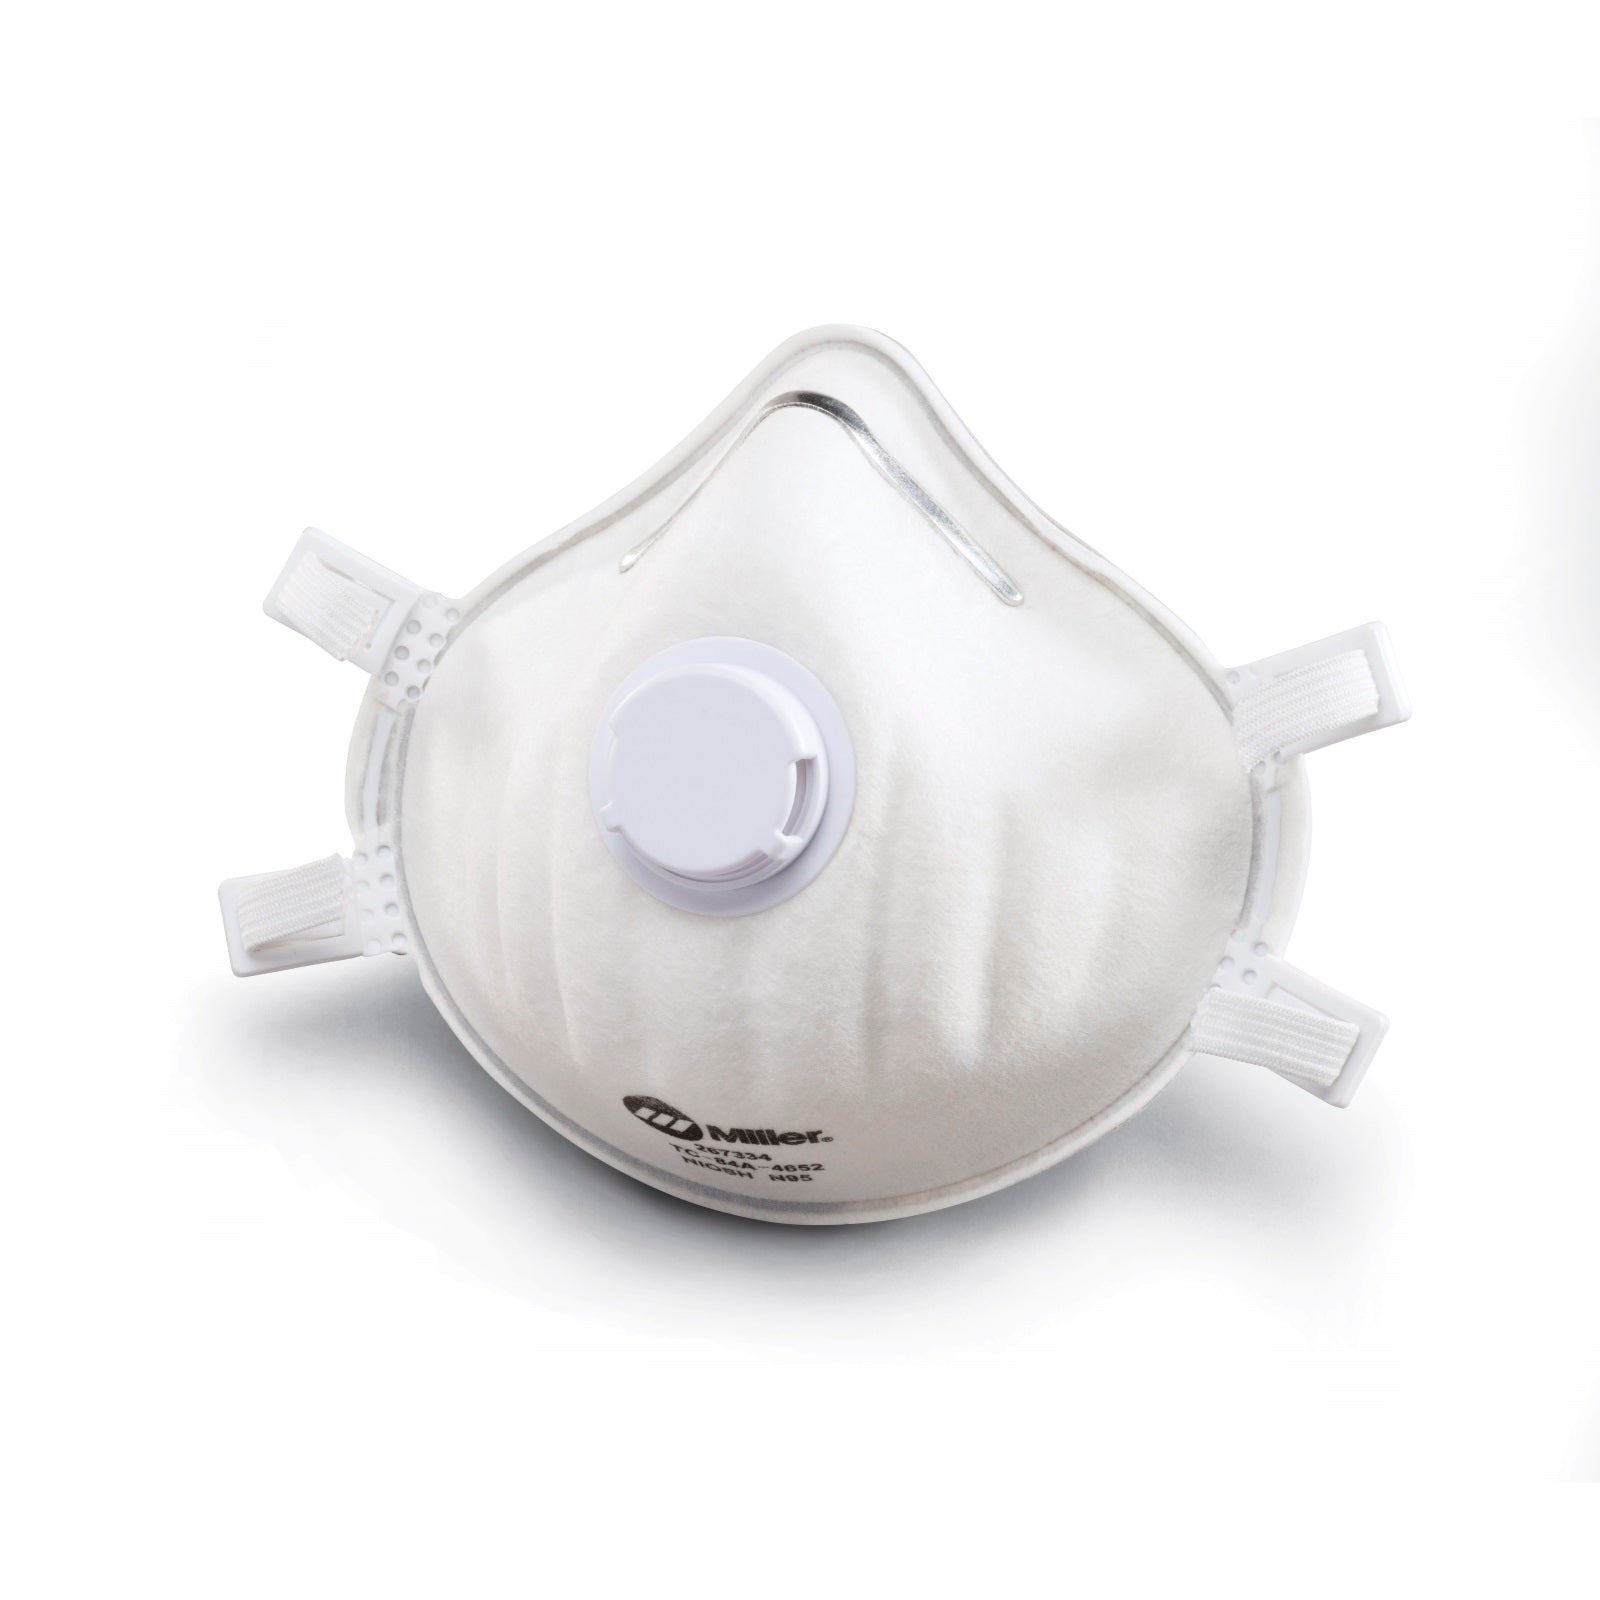 Miller N95 Disposable Mask Respirator with Valve (267334)